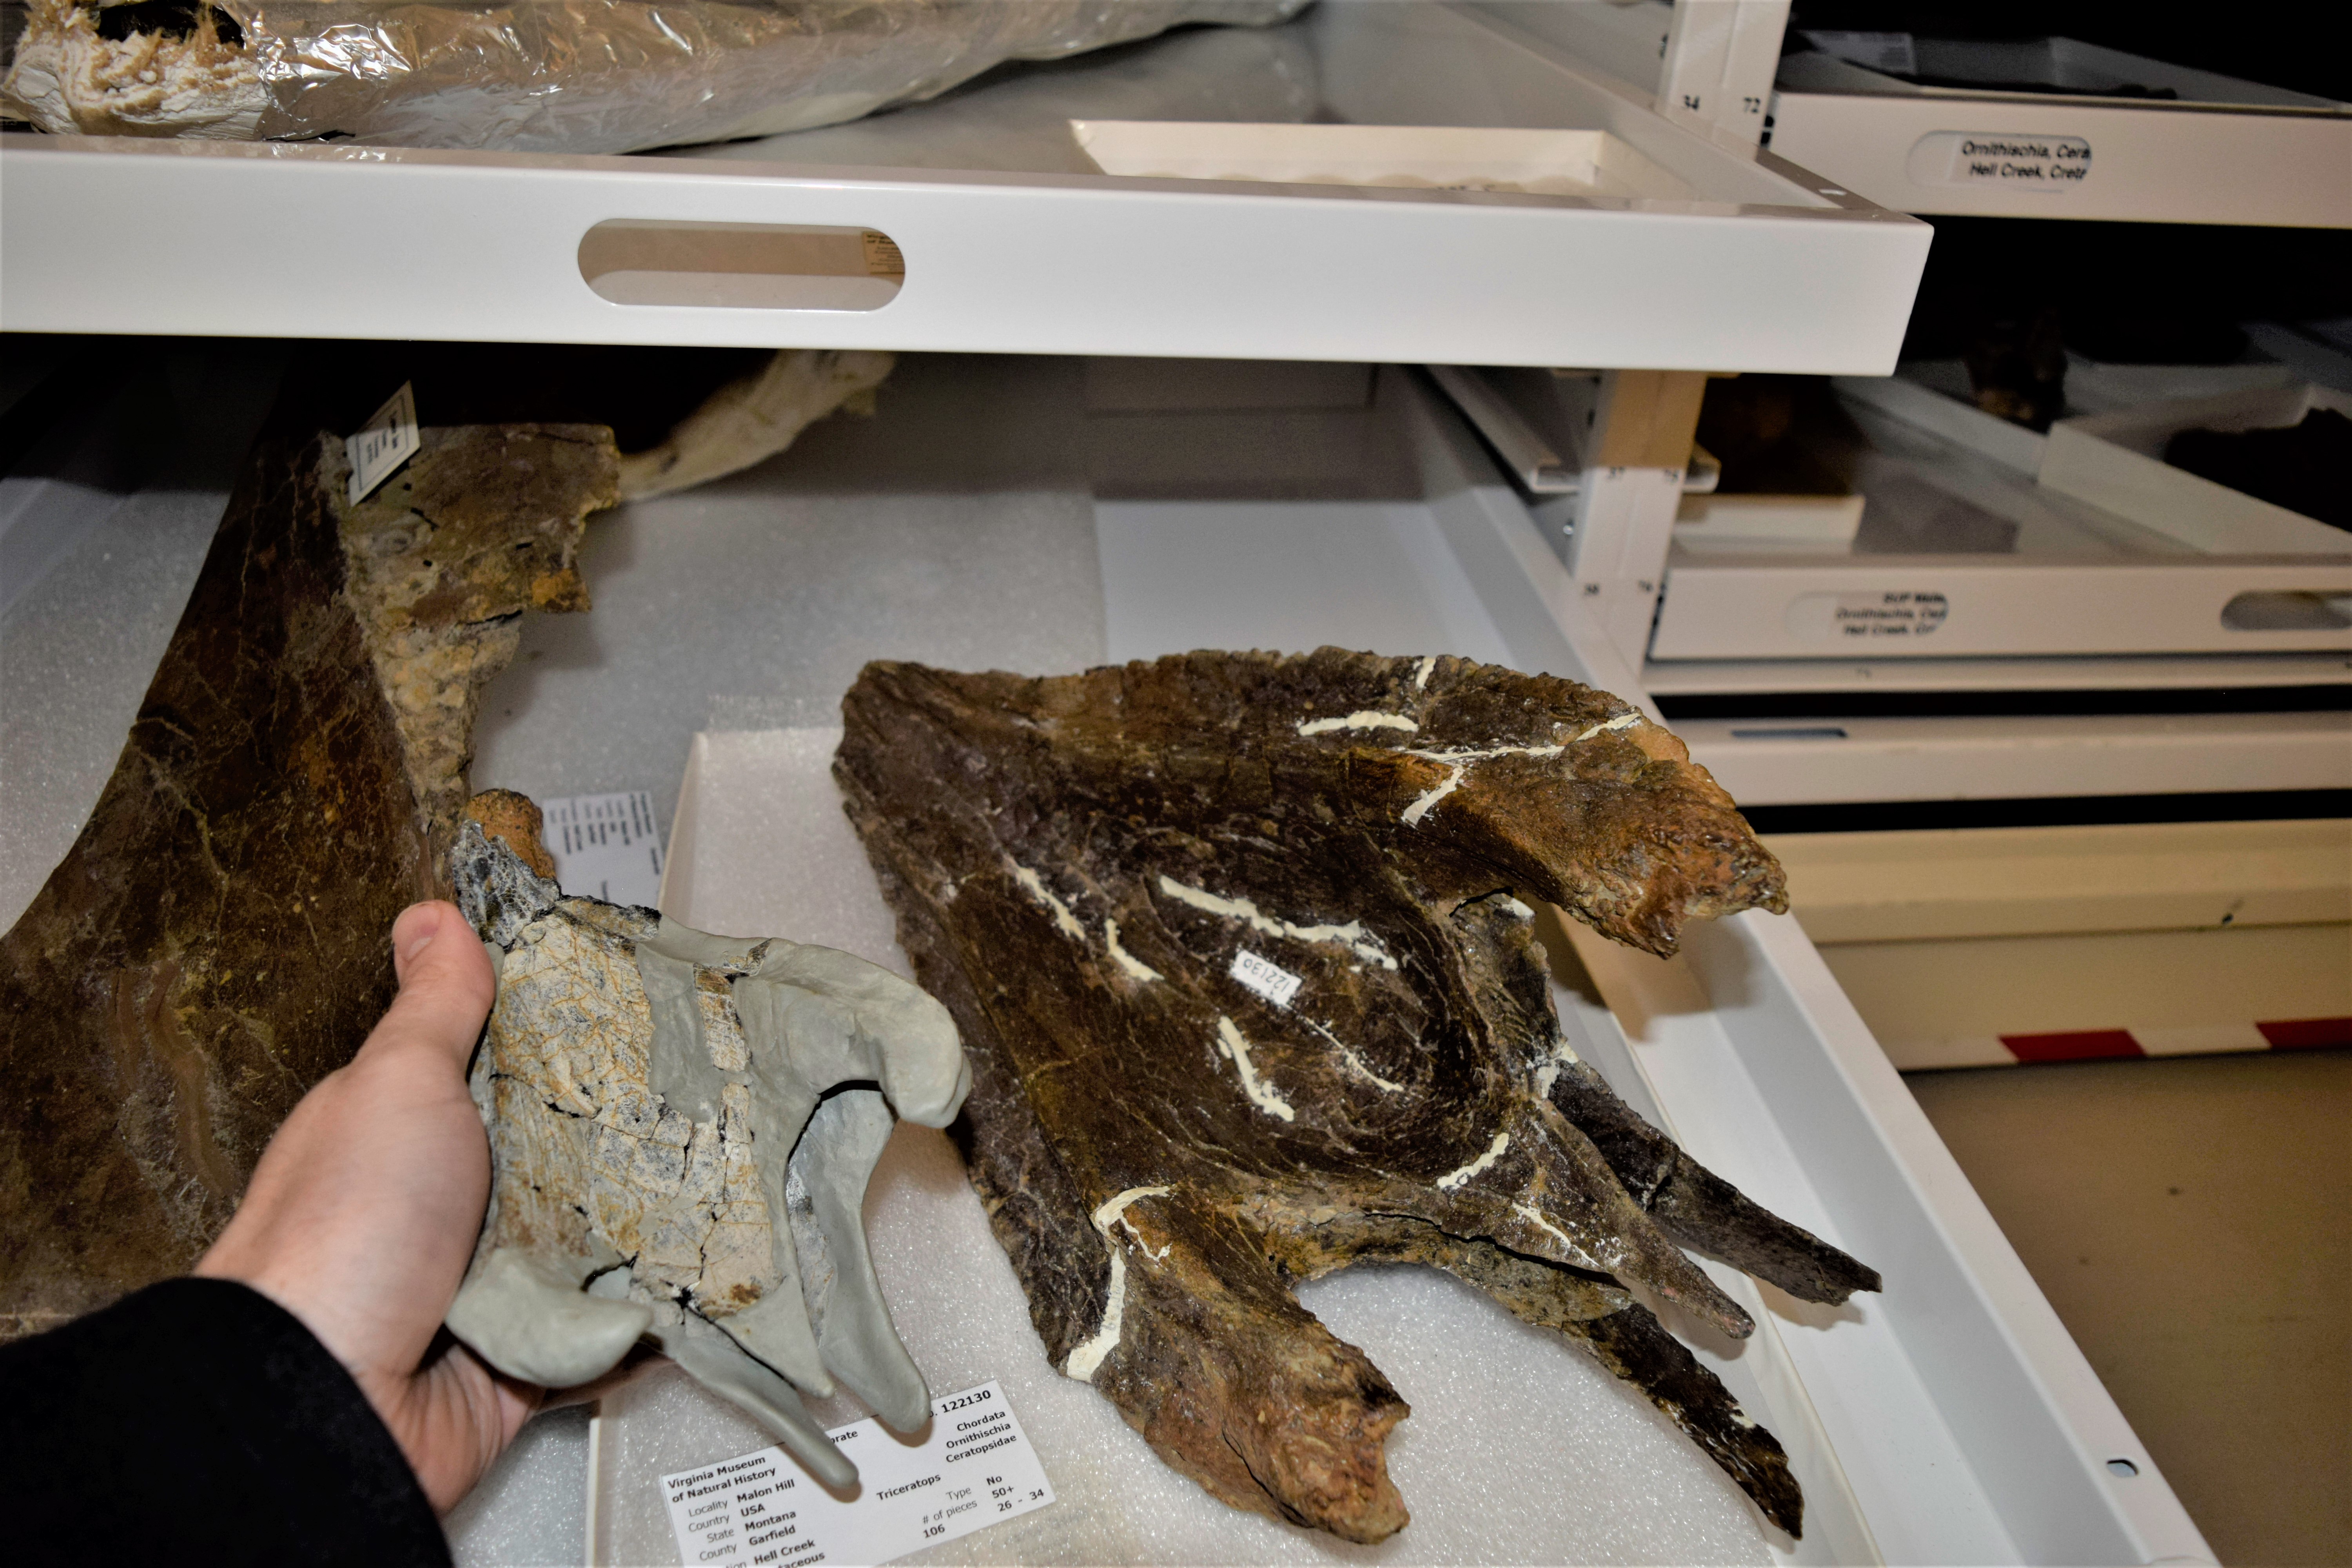 Two predentaries of Triceratops sp. The left specimen is from a juvenile individual. The right specimen is from an adult.